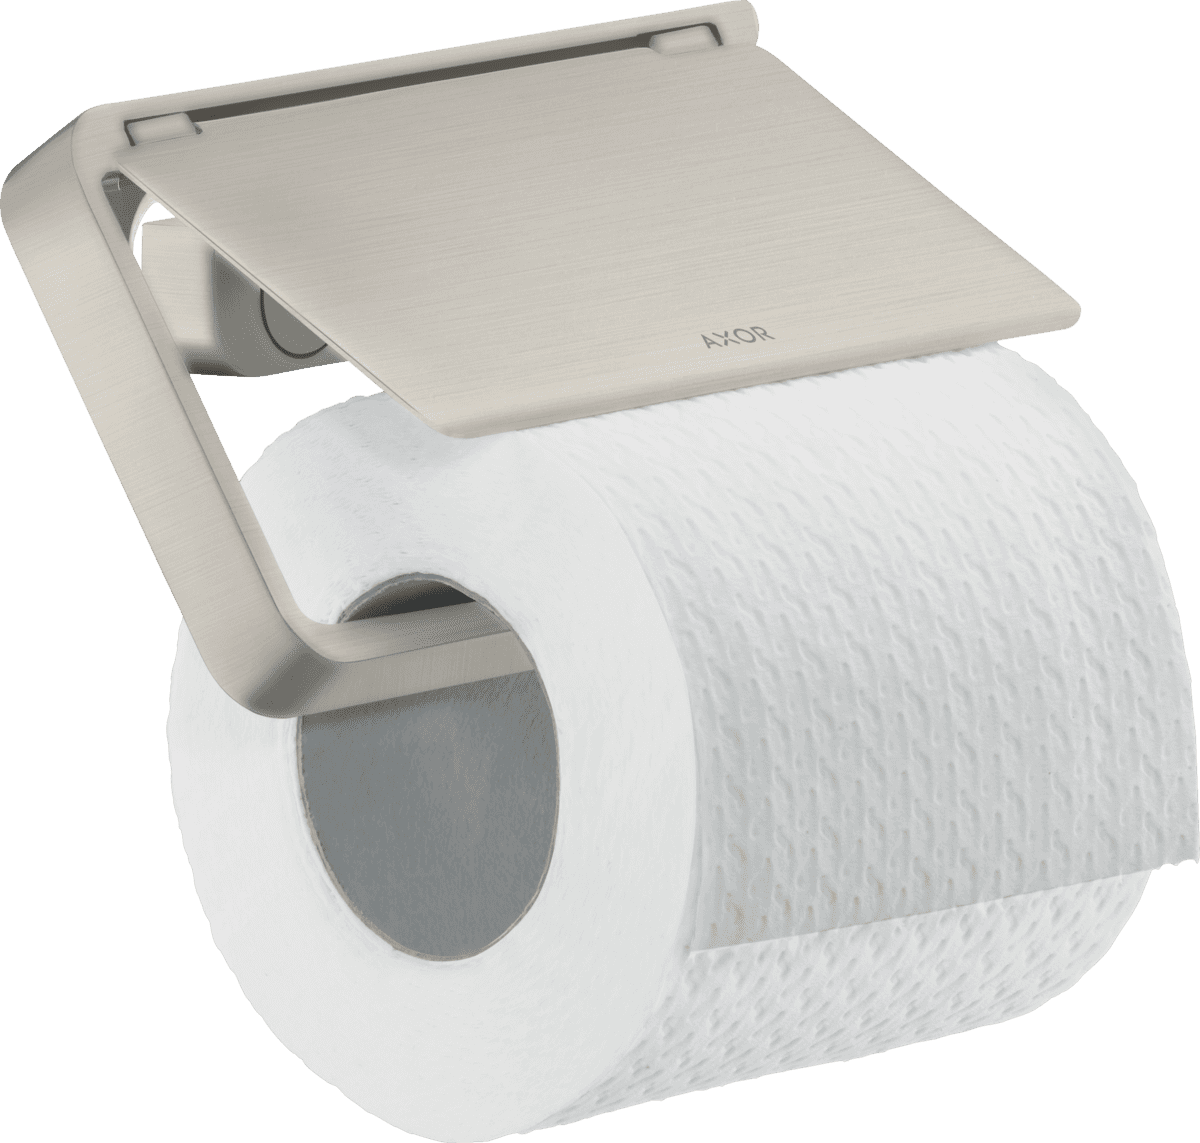 HANSGROHE AXOR Universal Softsquare Toilet paper holder with cover #42836800 - Stainless Steel Optic resmi